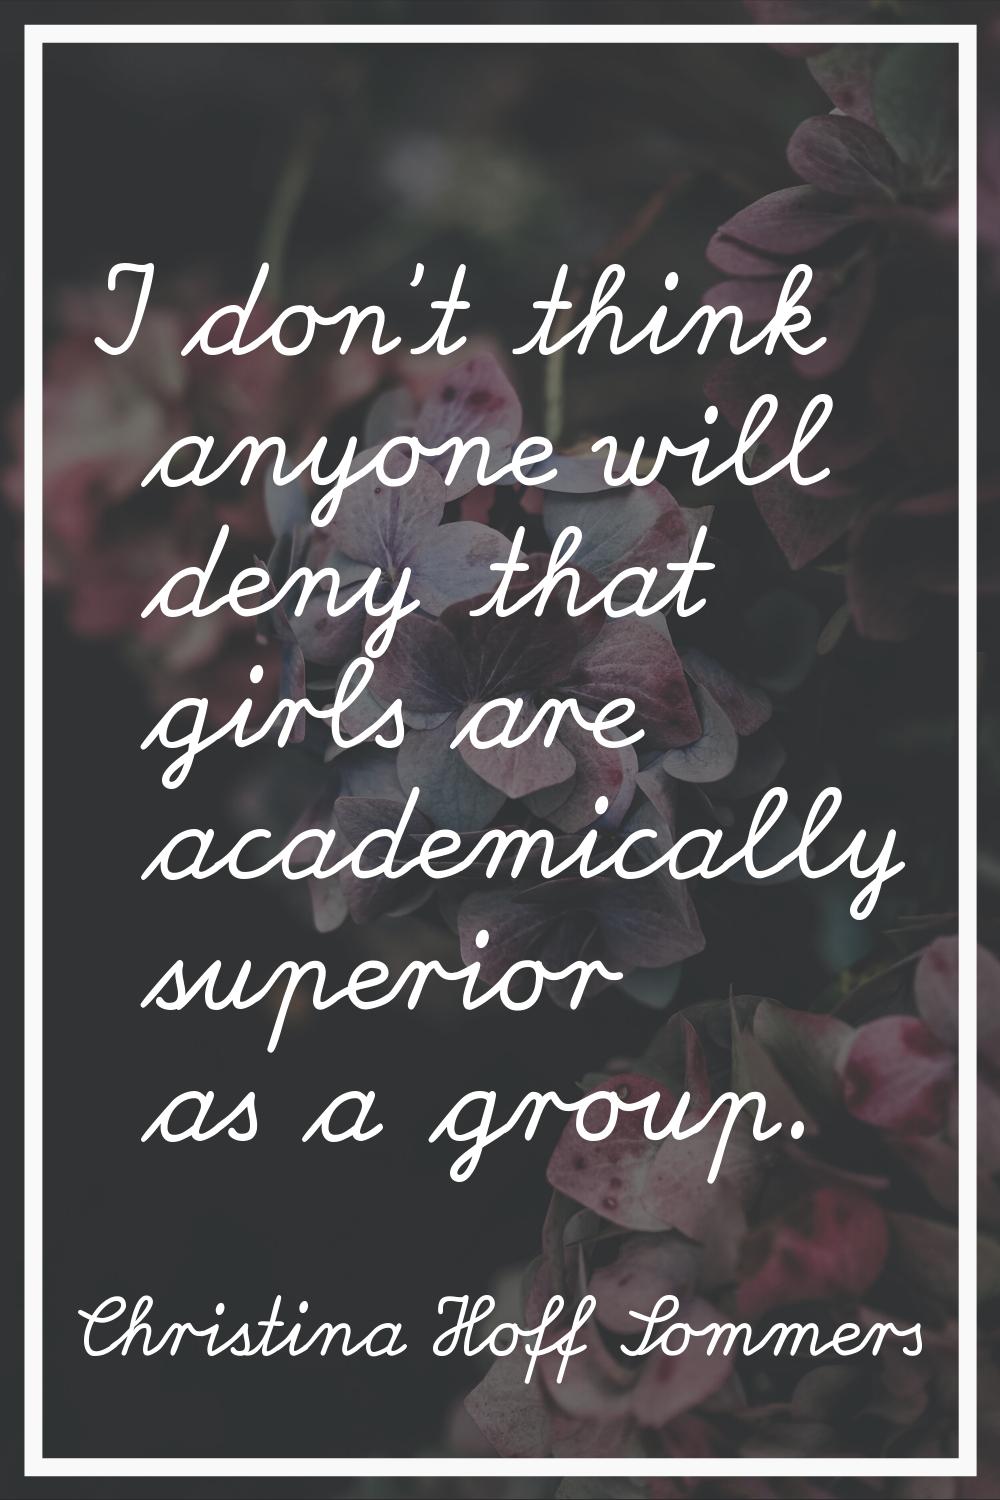 I don't think anyone will deny that girls are academically superior as a group.